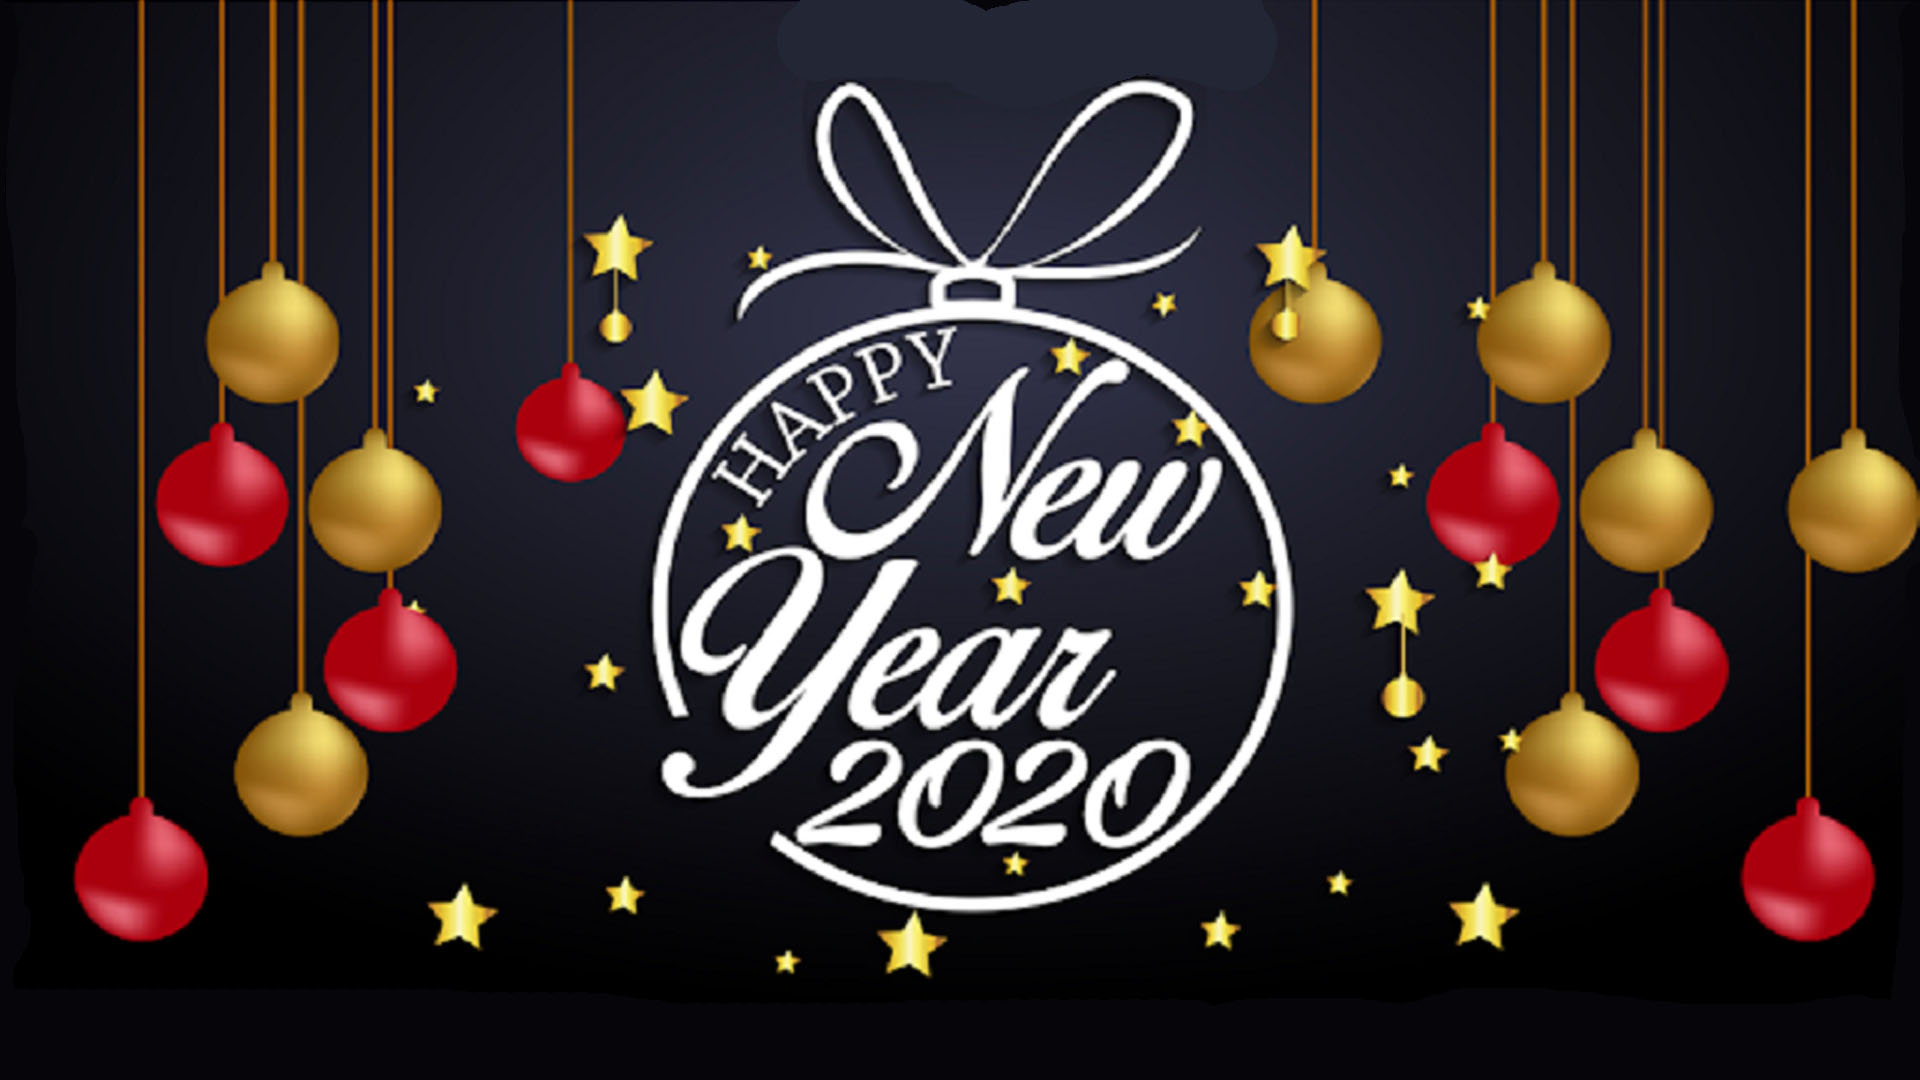 Golden Happy New Year 2020 Greeting Card Desktop Wallpapers For